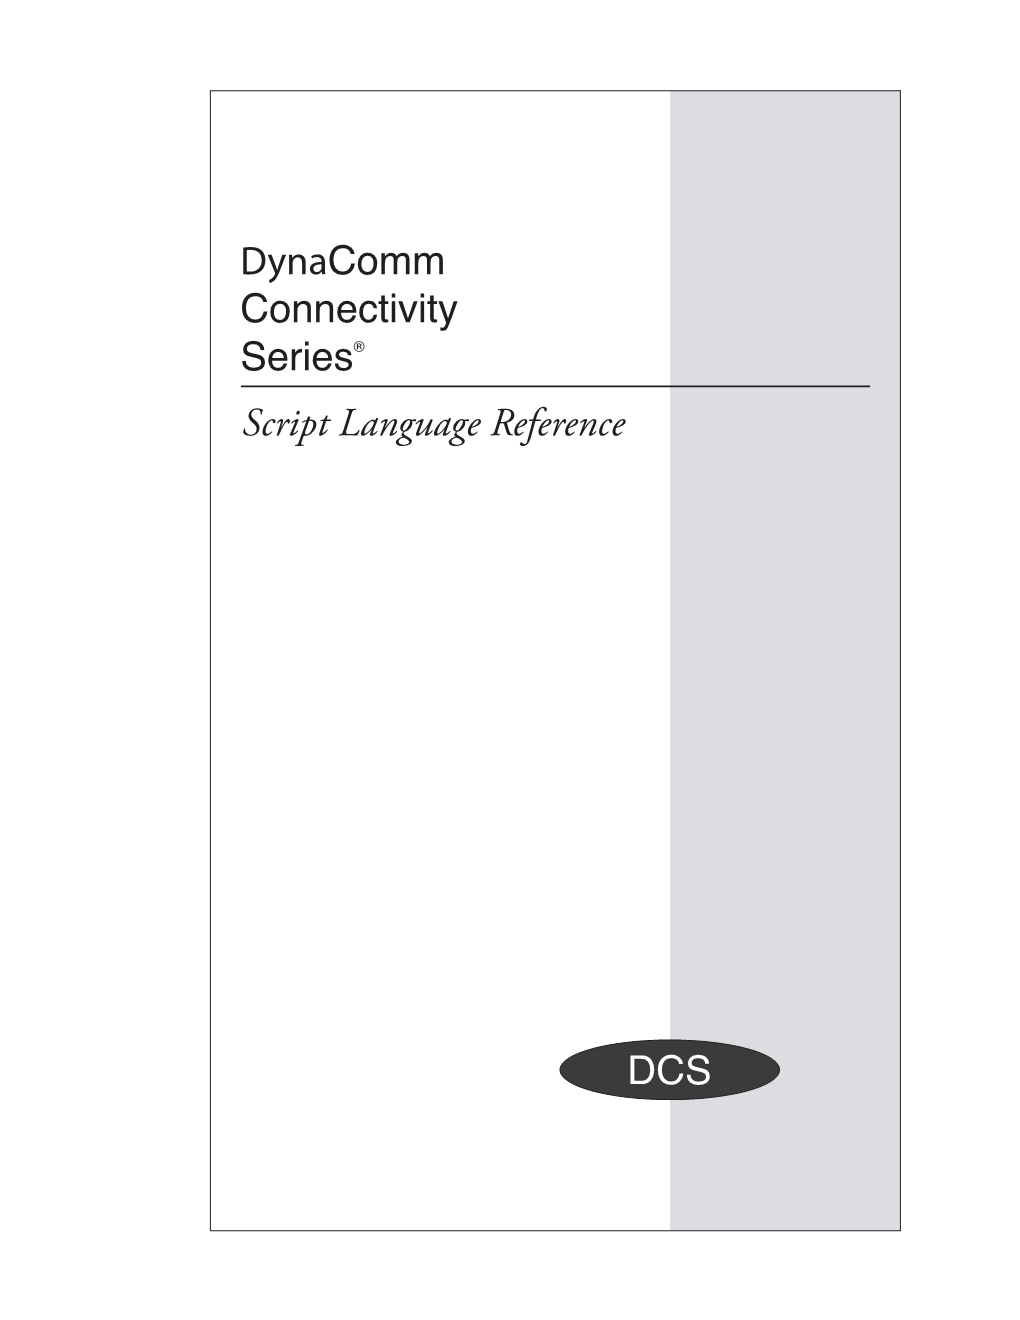 Dynacomm Connectivity Series® Script Language Reference